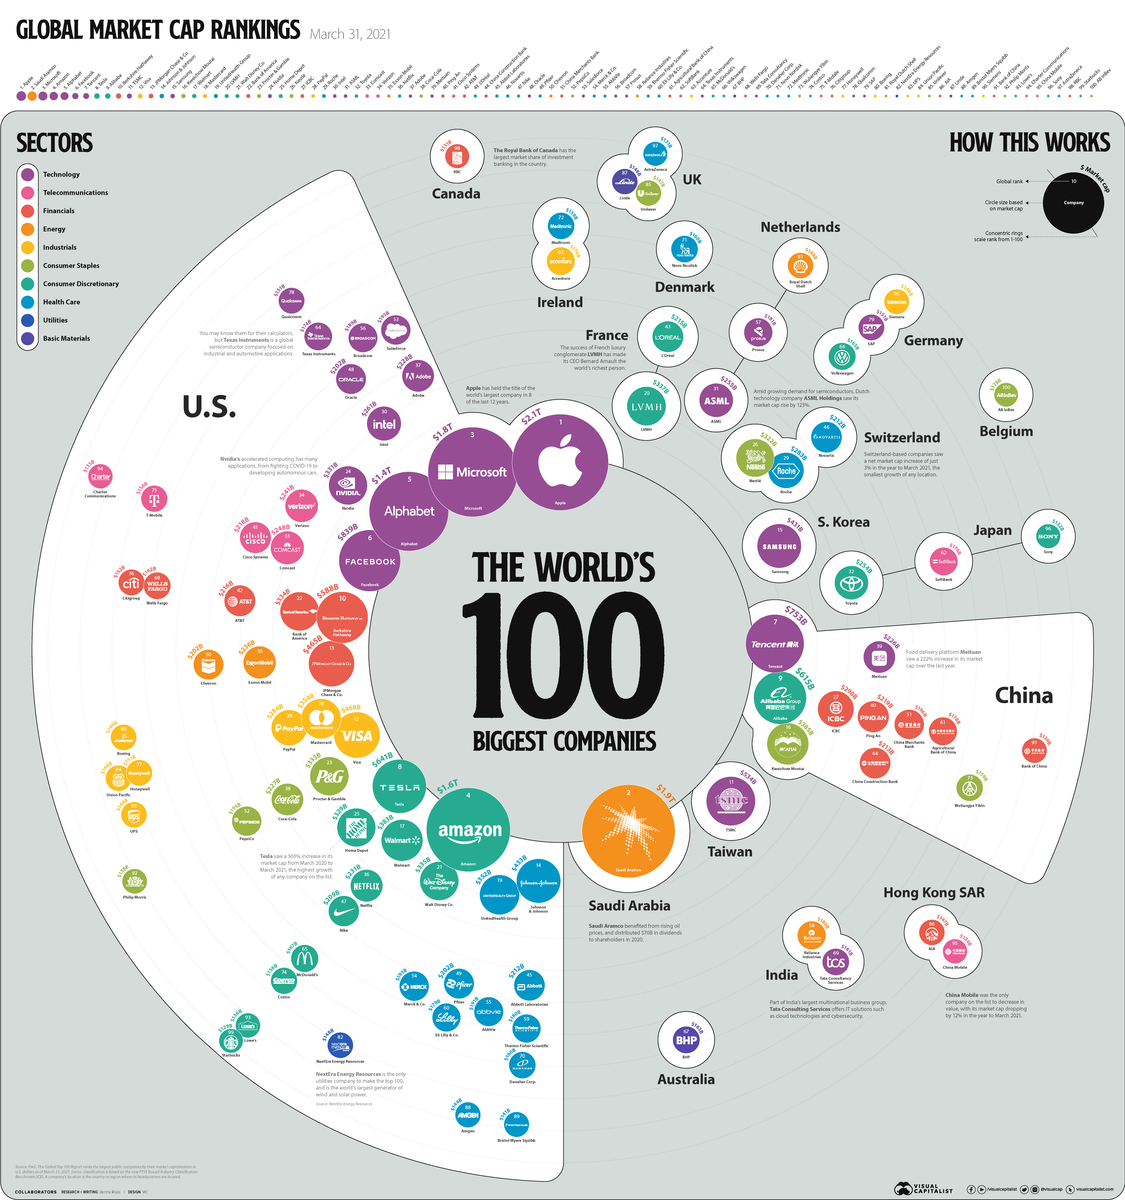 Visualizing the biggest 100 companies in the world